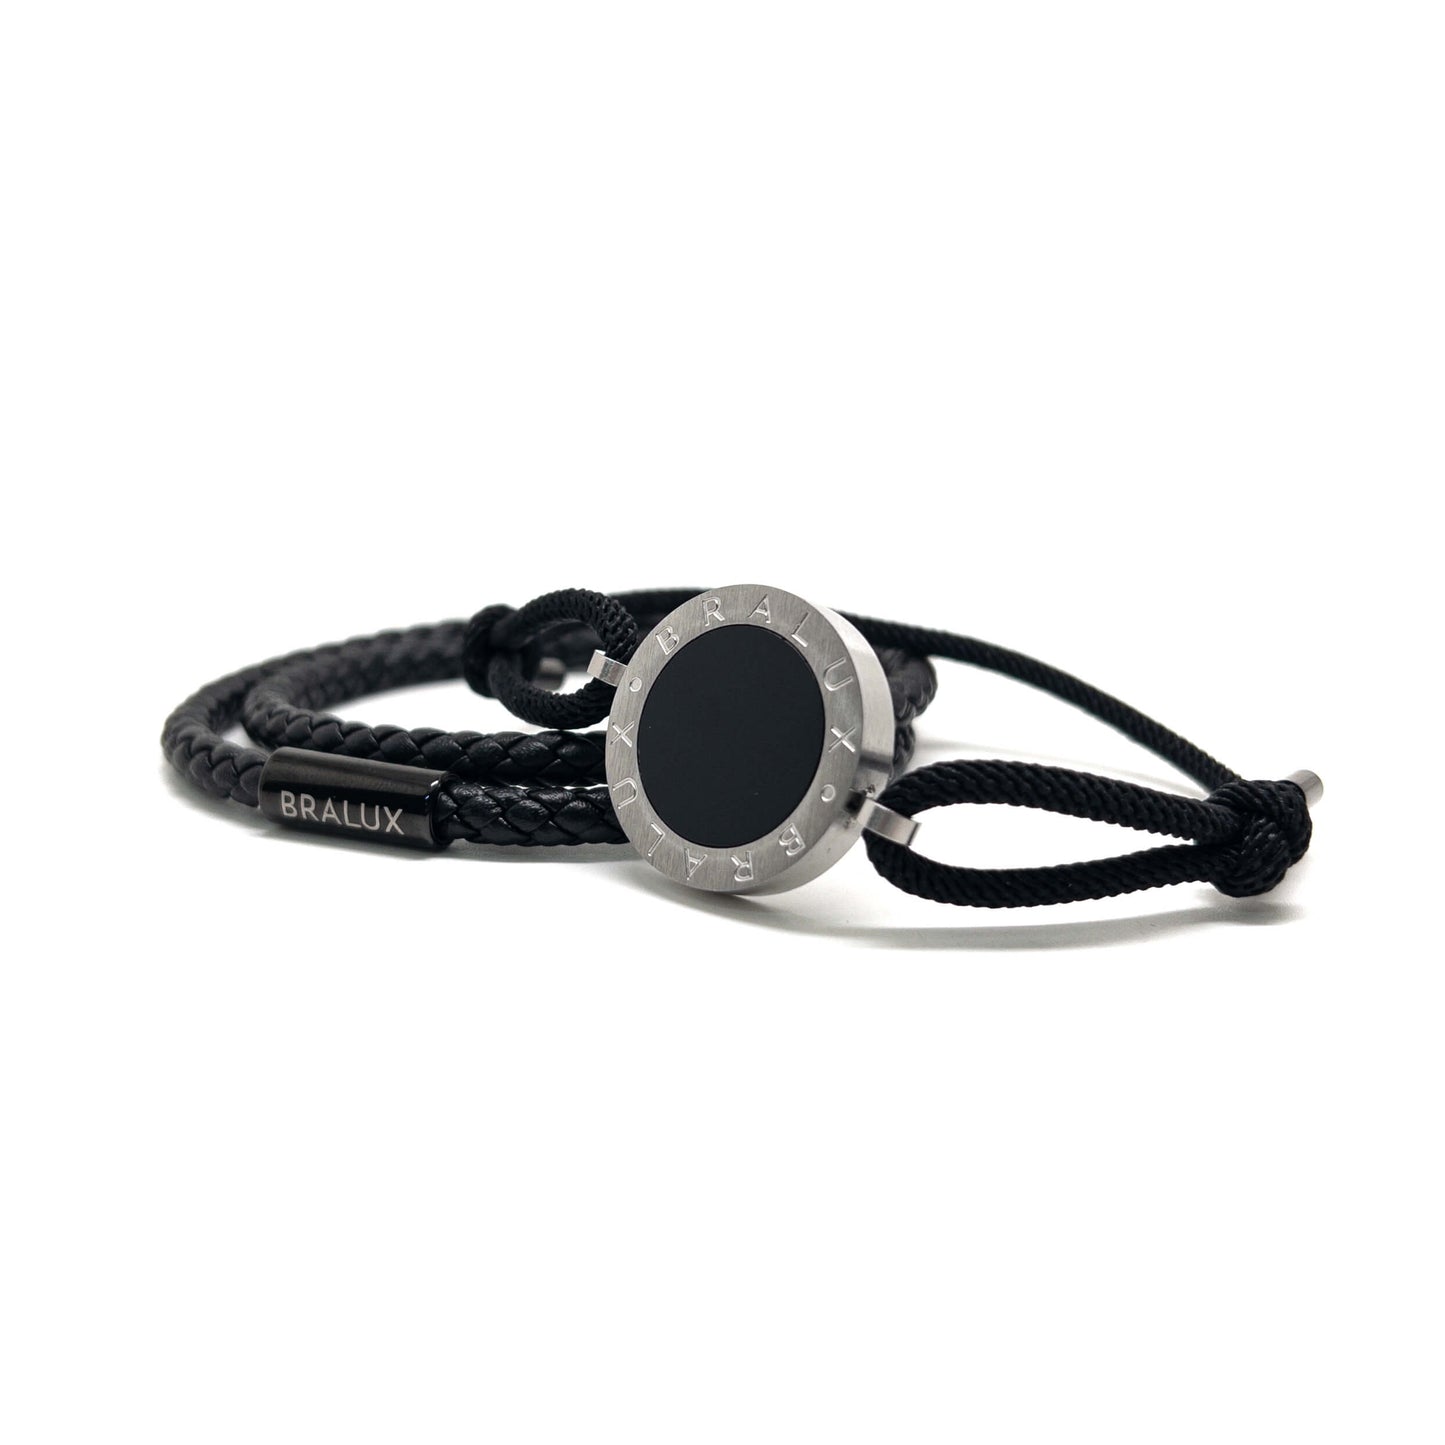 The Circle Onyx Stone and Black leather stack